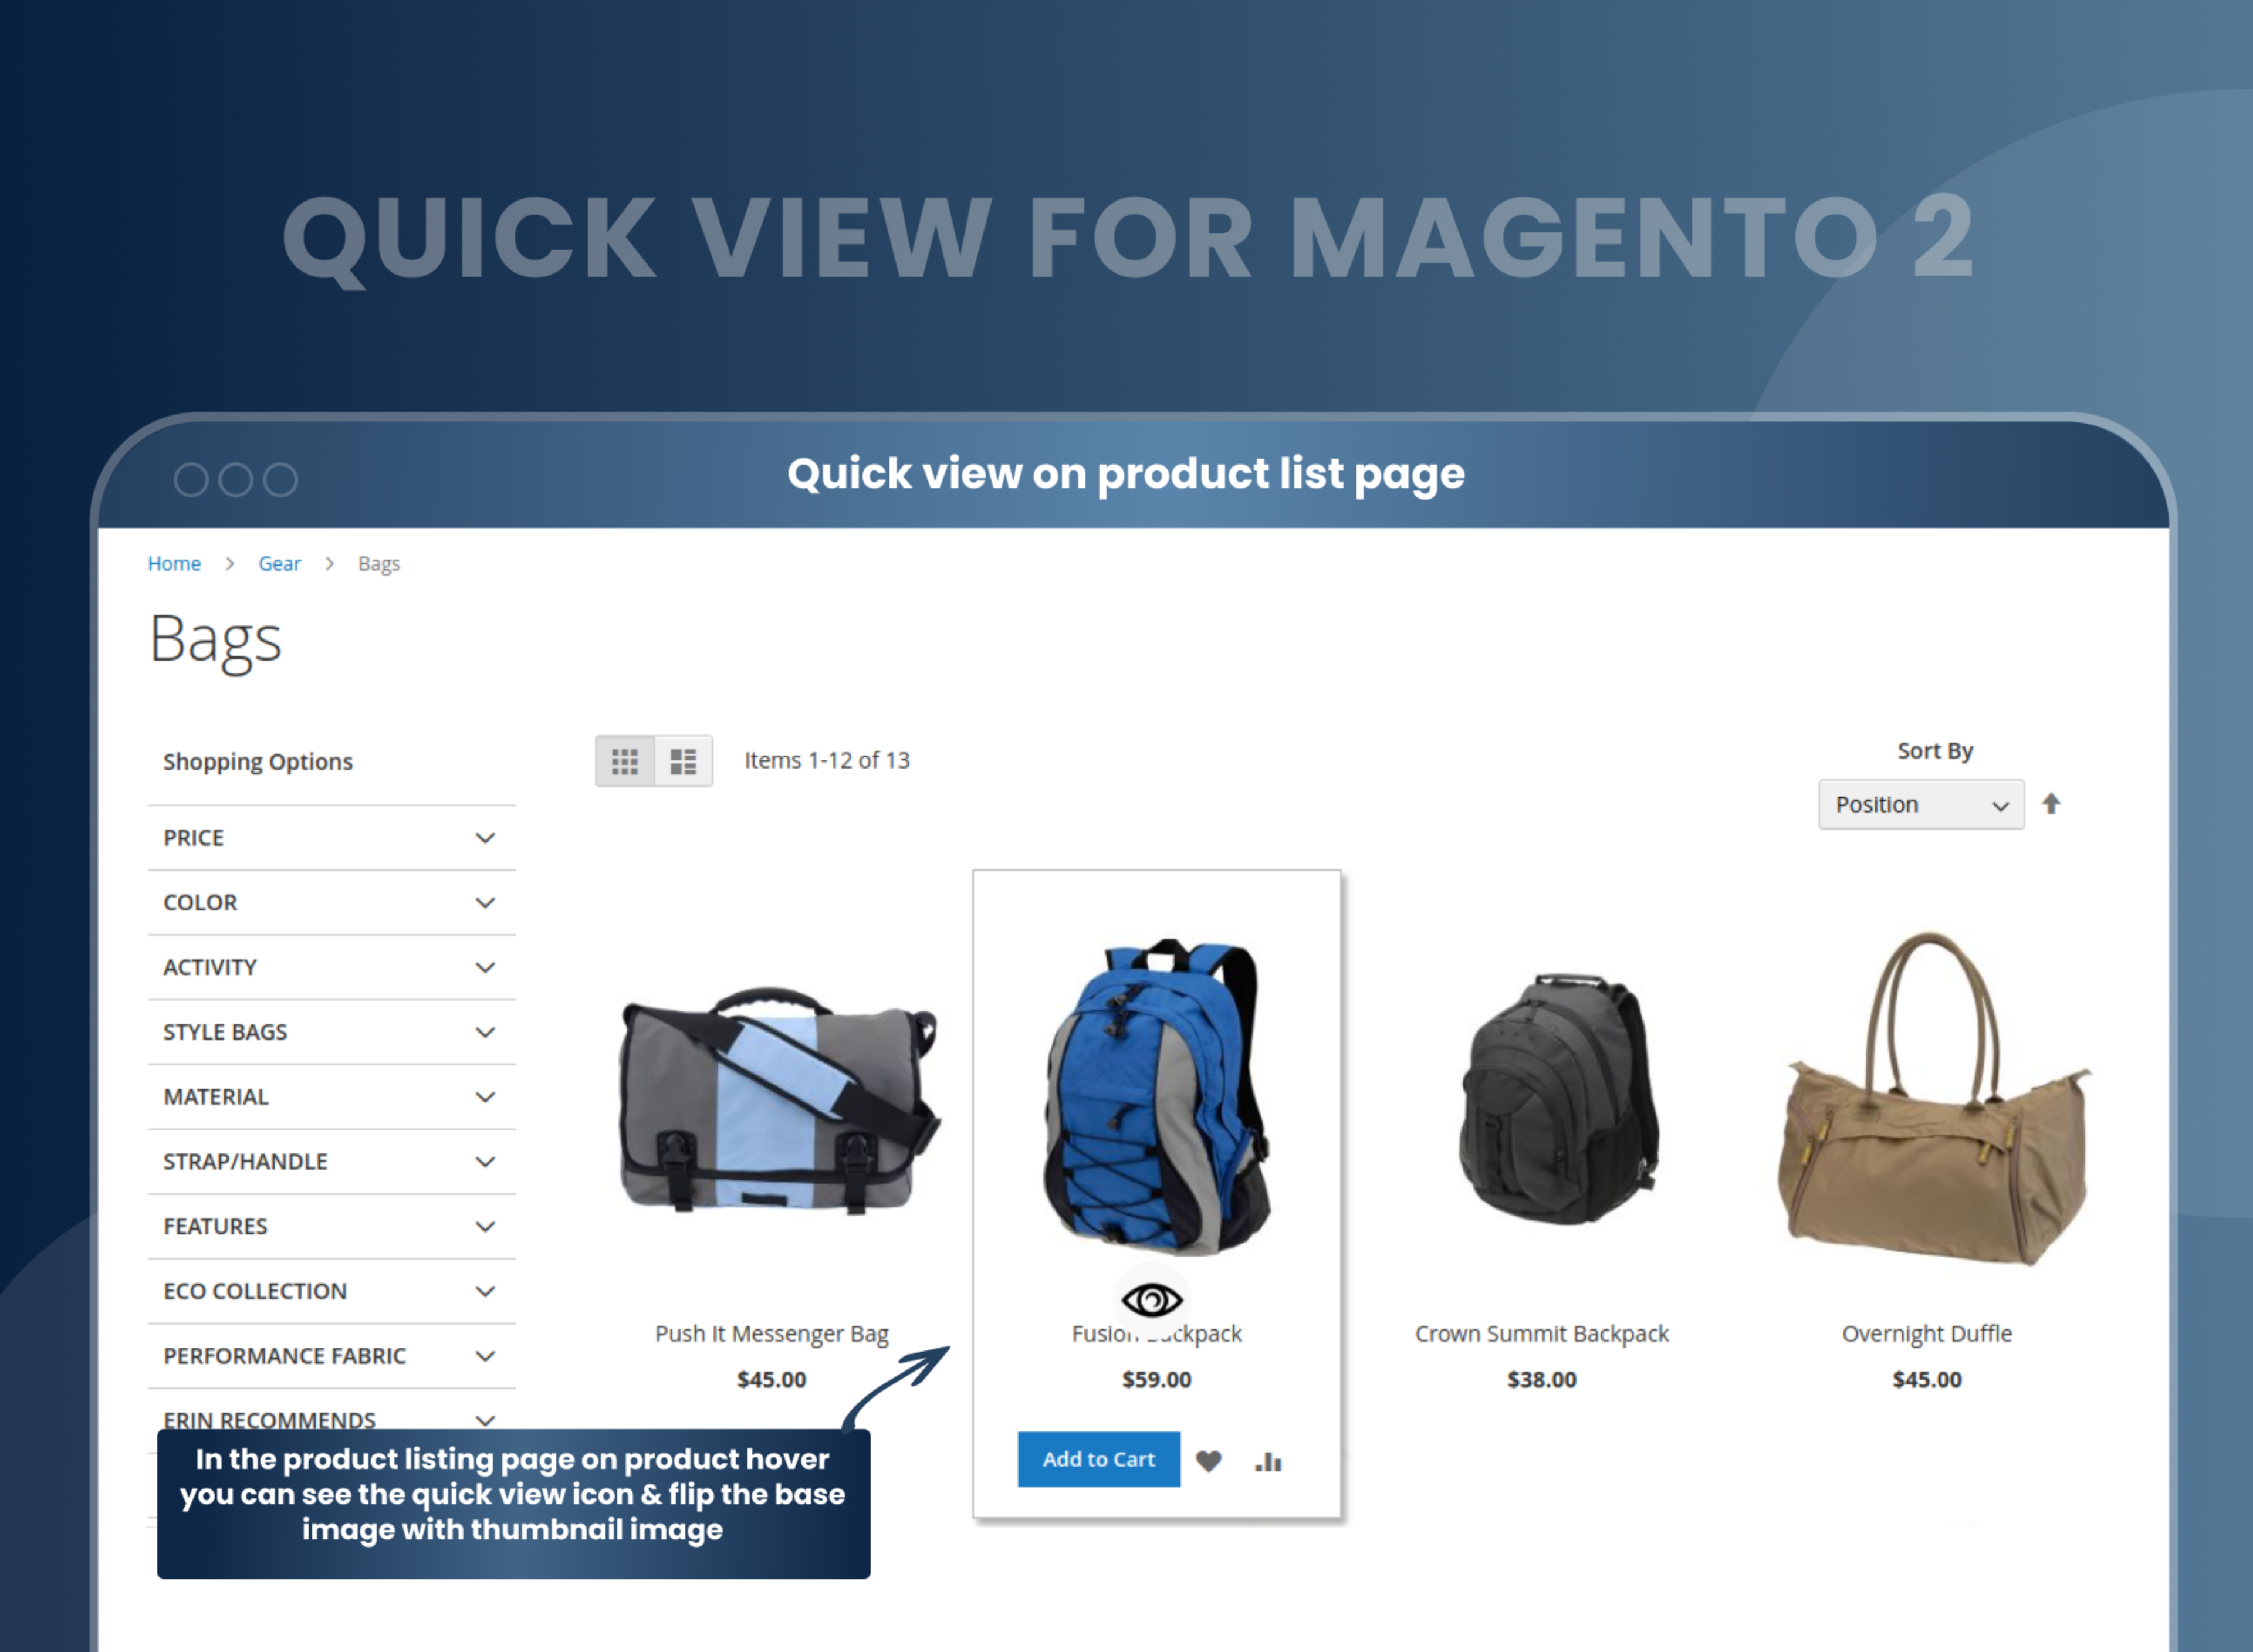 Quick view on product list page